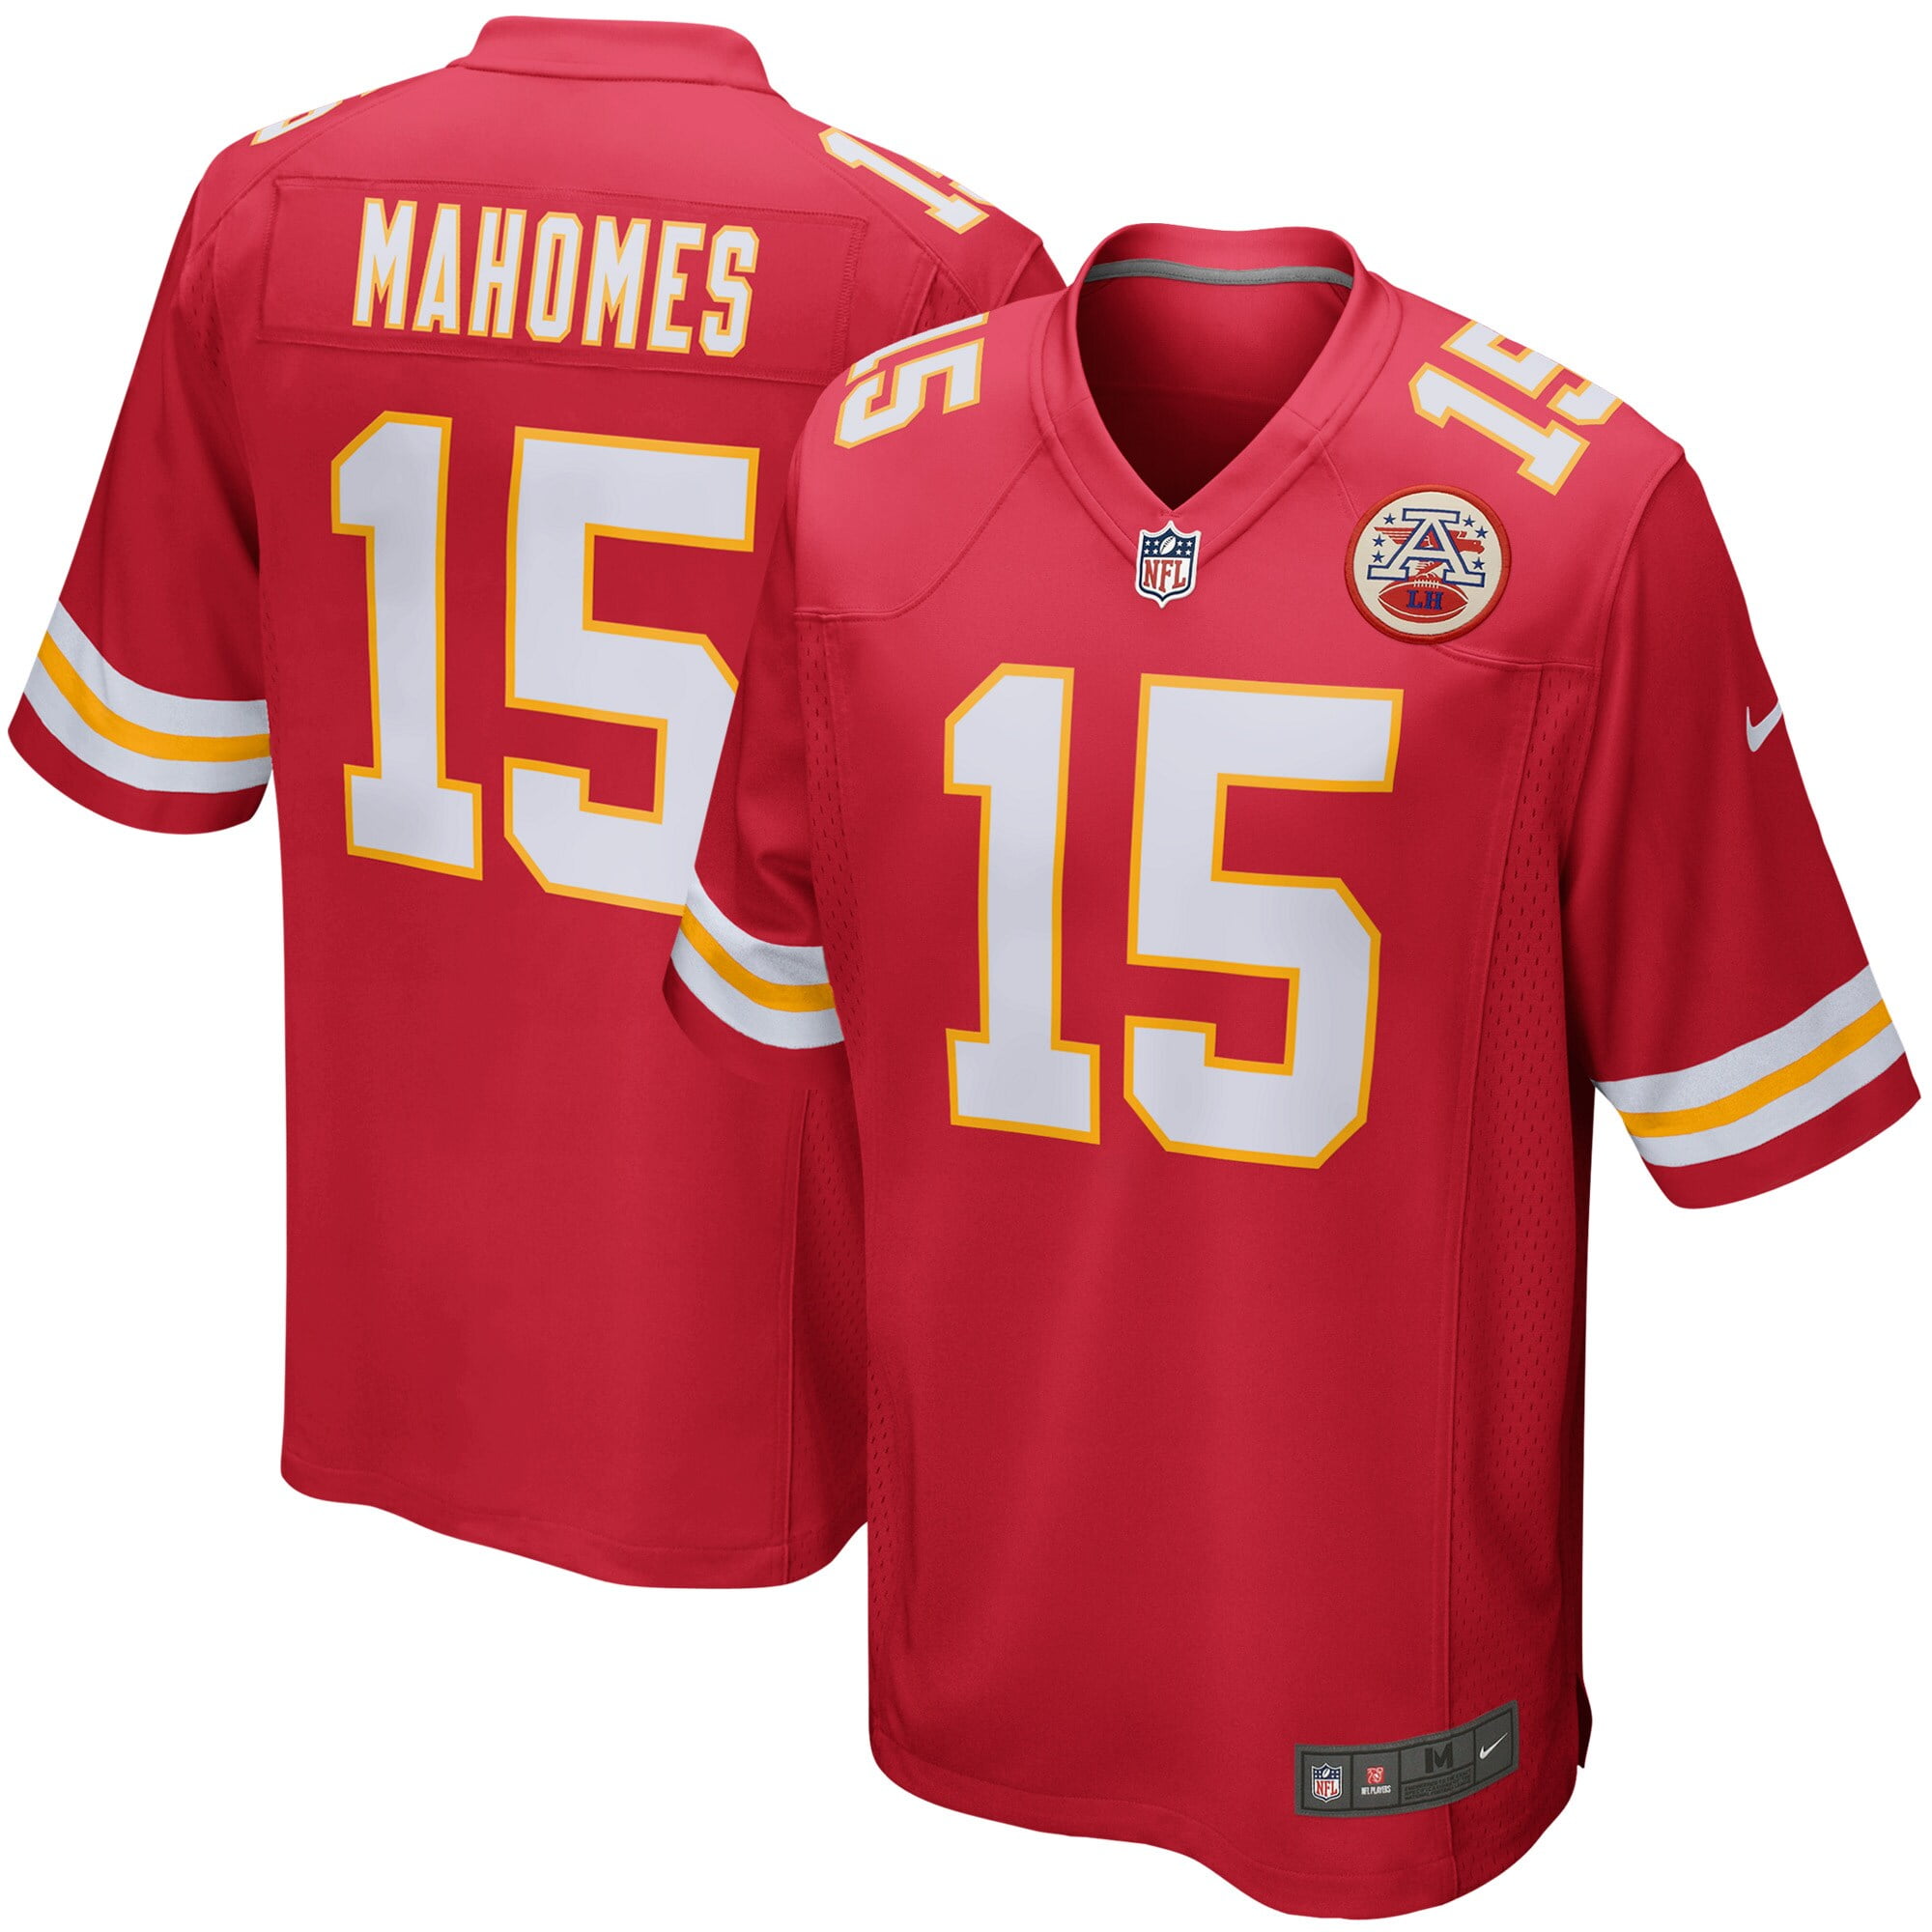 Outerstuff Youth Patrick Mahomes Red Kansas City Chiefs Replica Player Jersey 